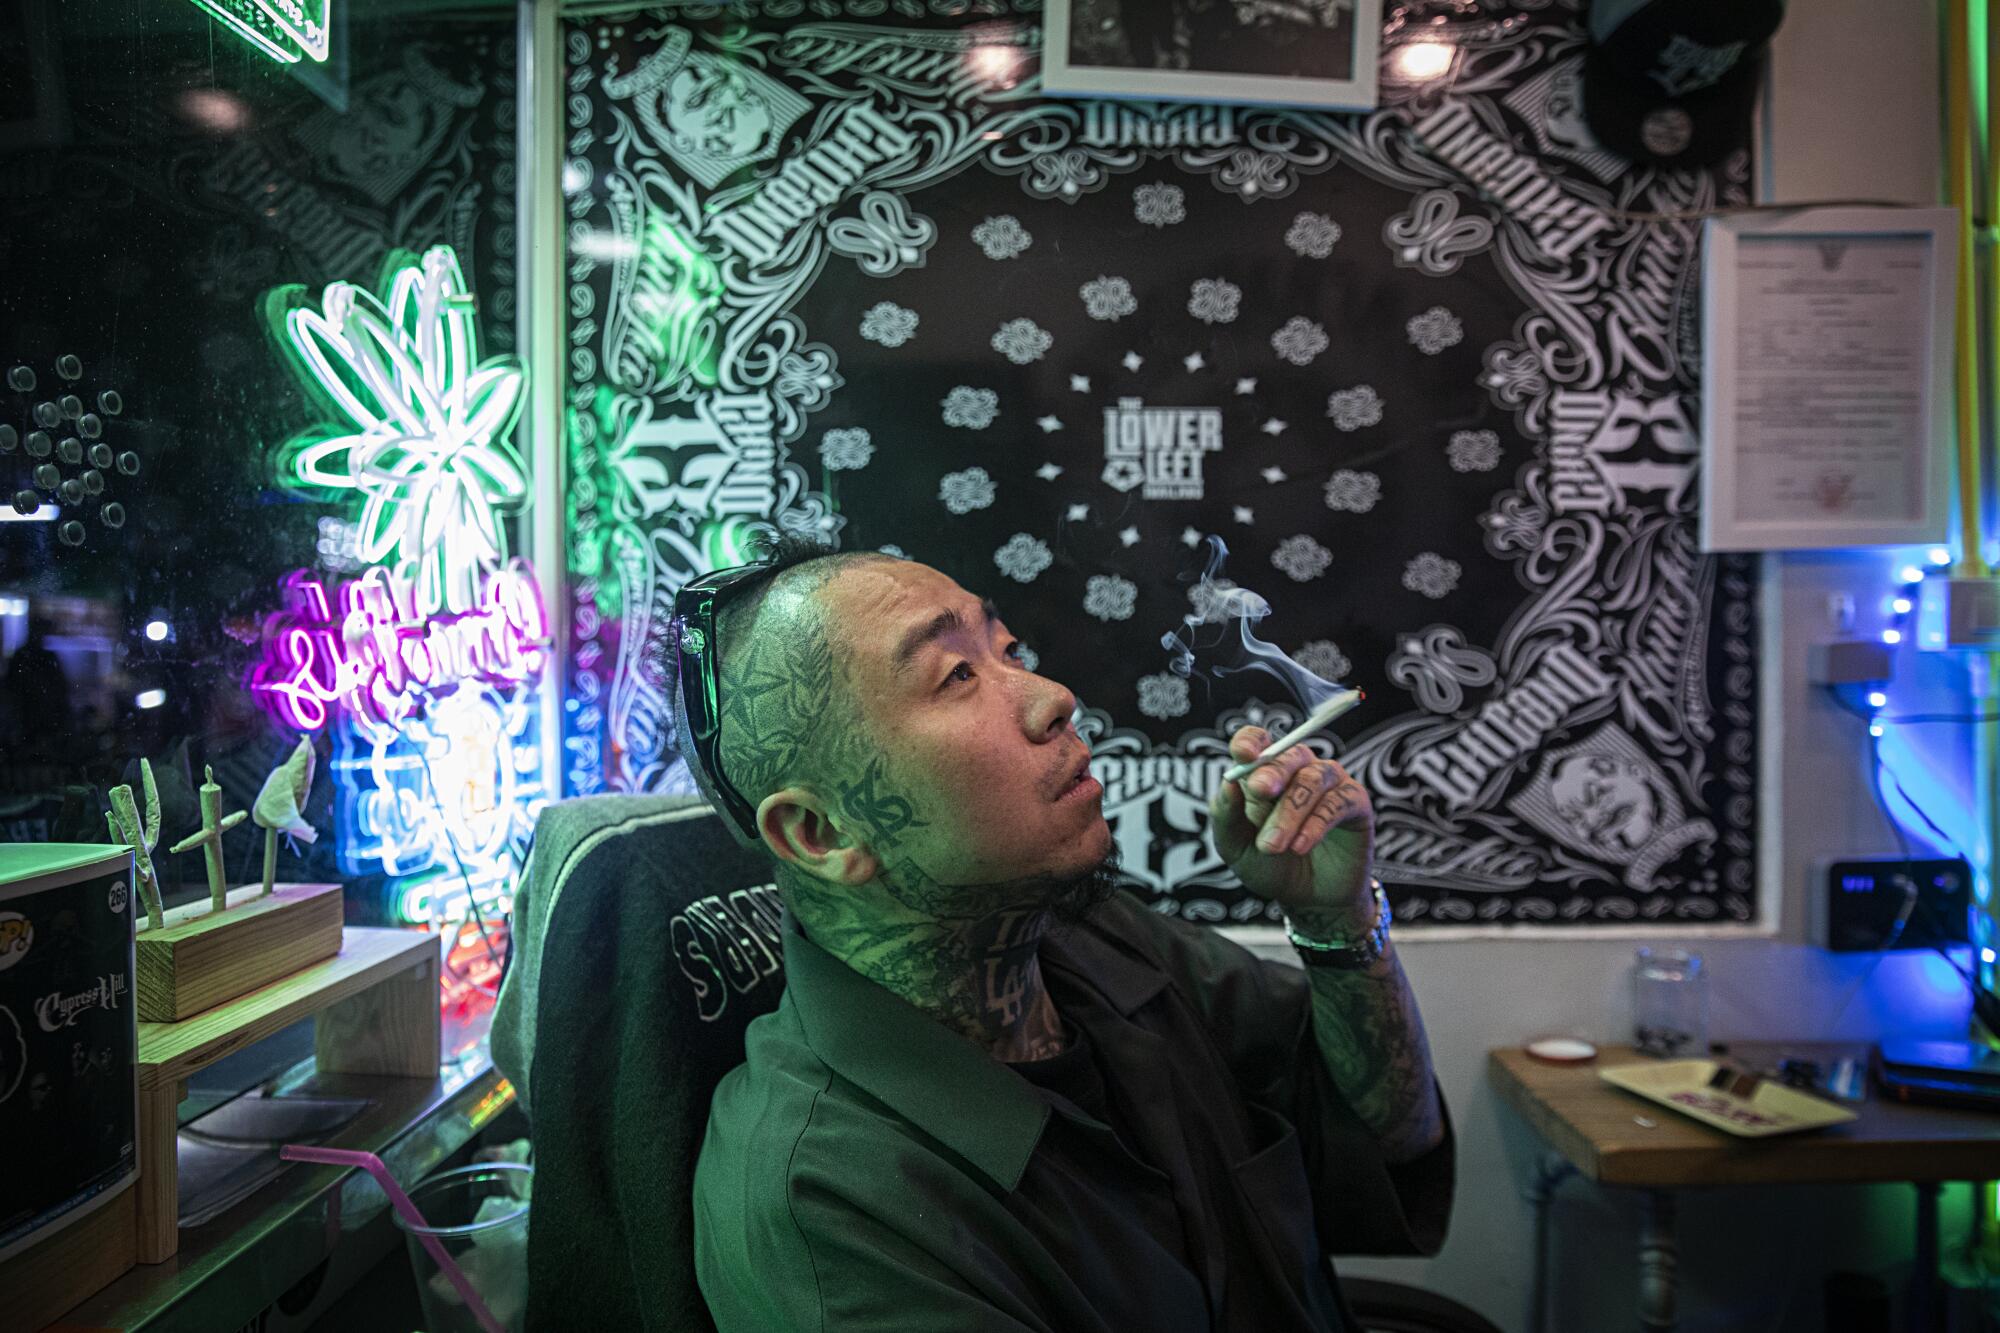 A man smokes a joint in a dark room with some neon lights.